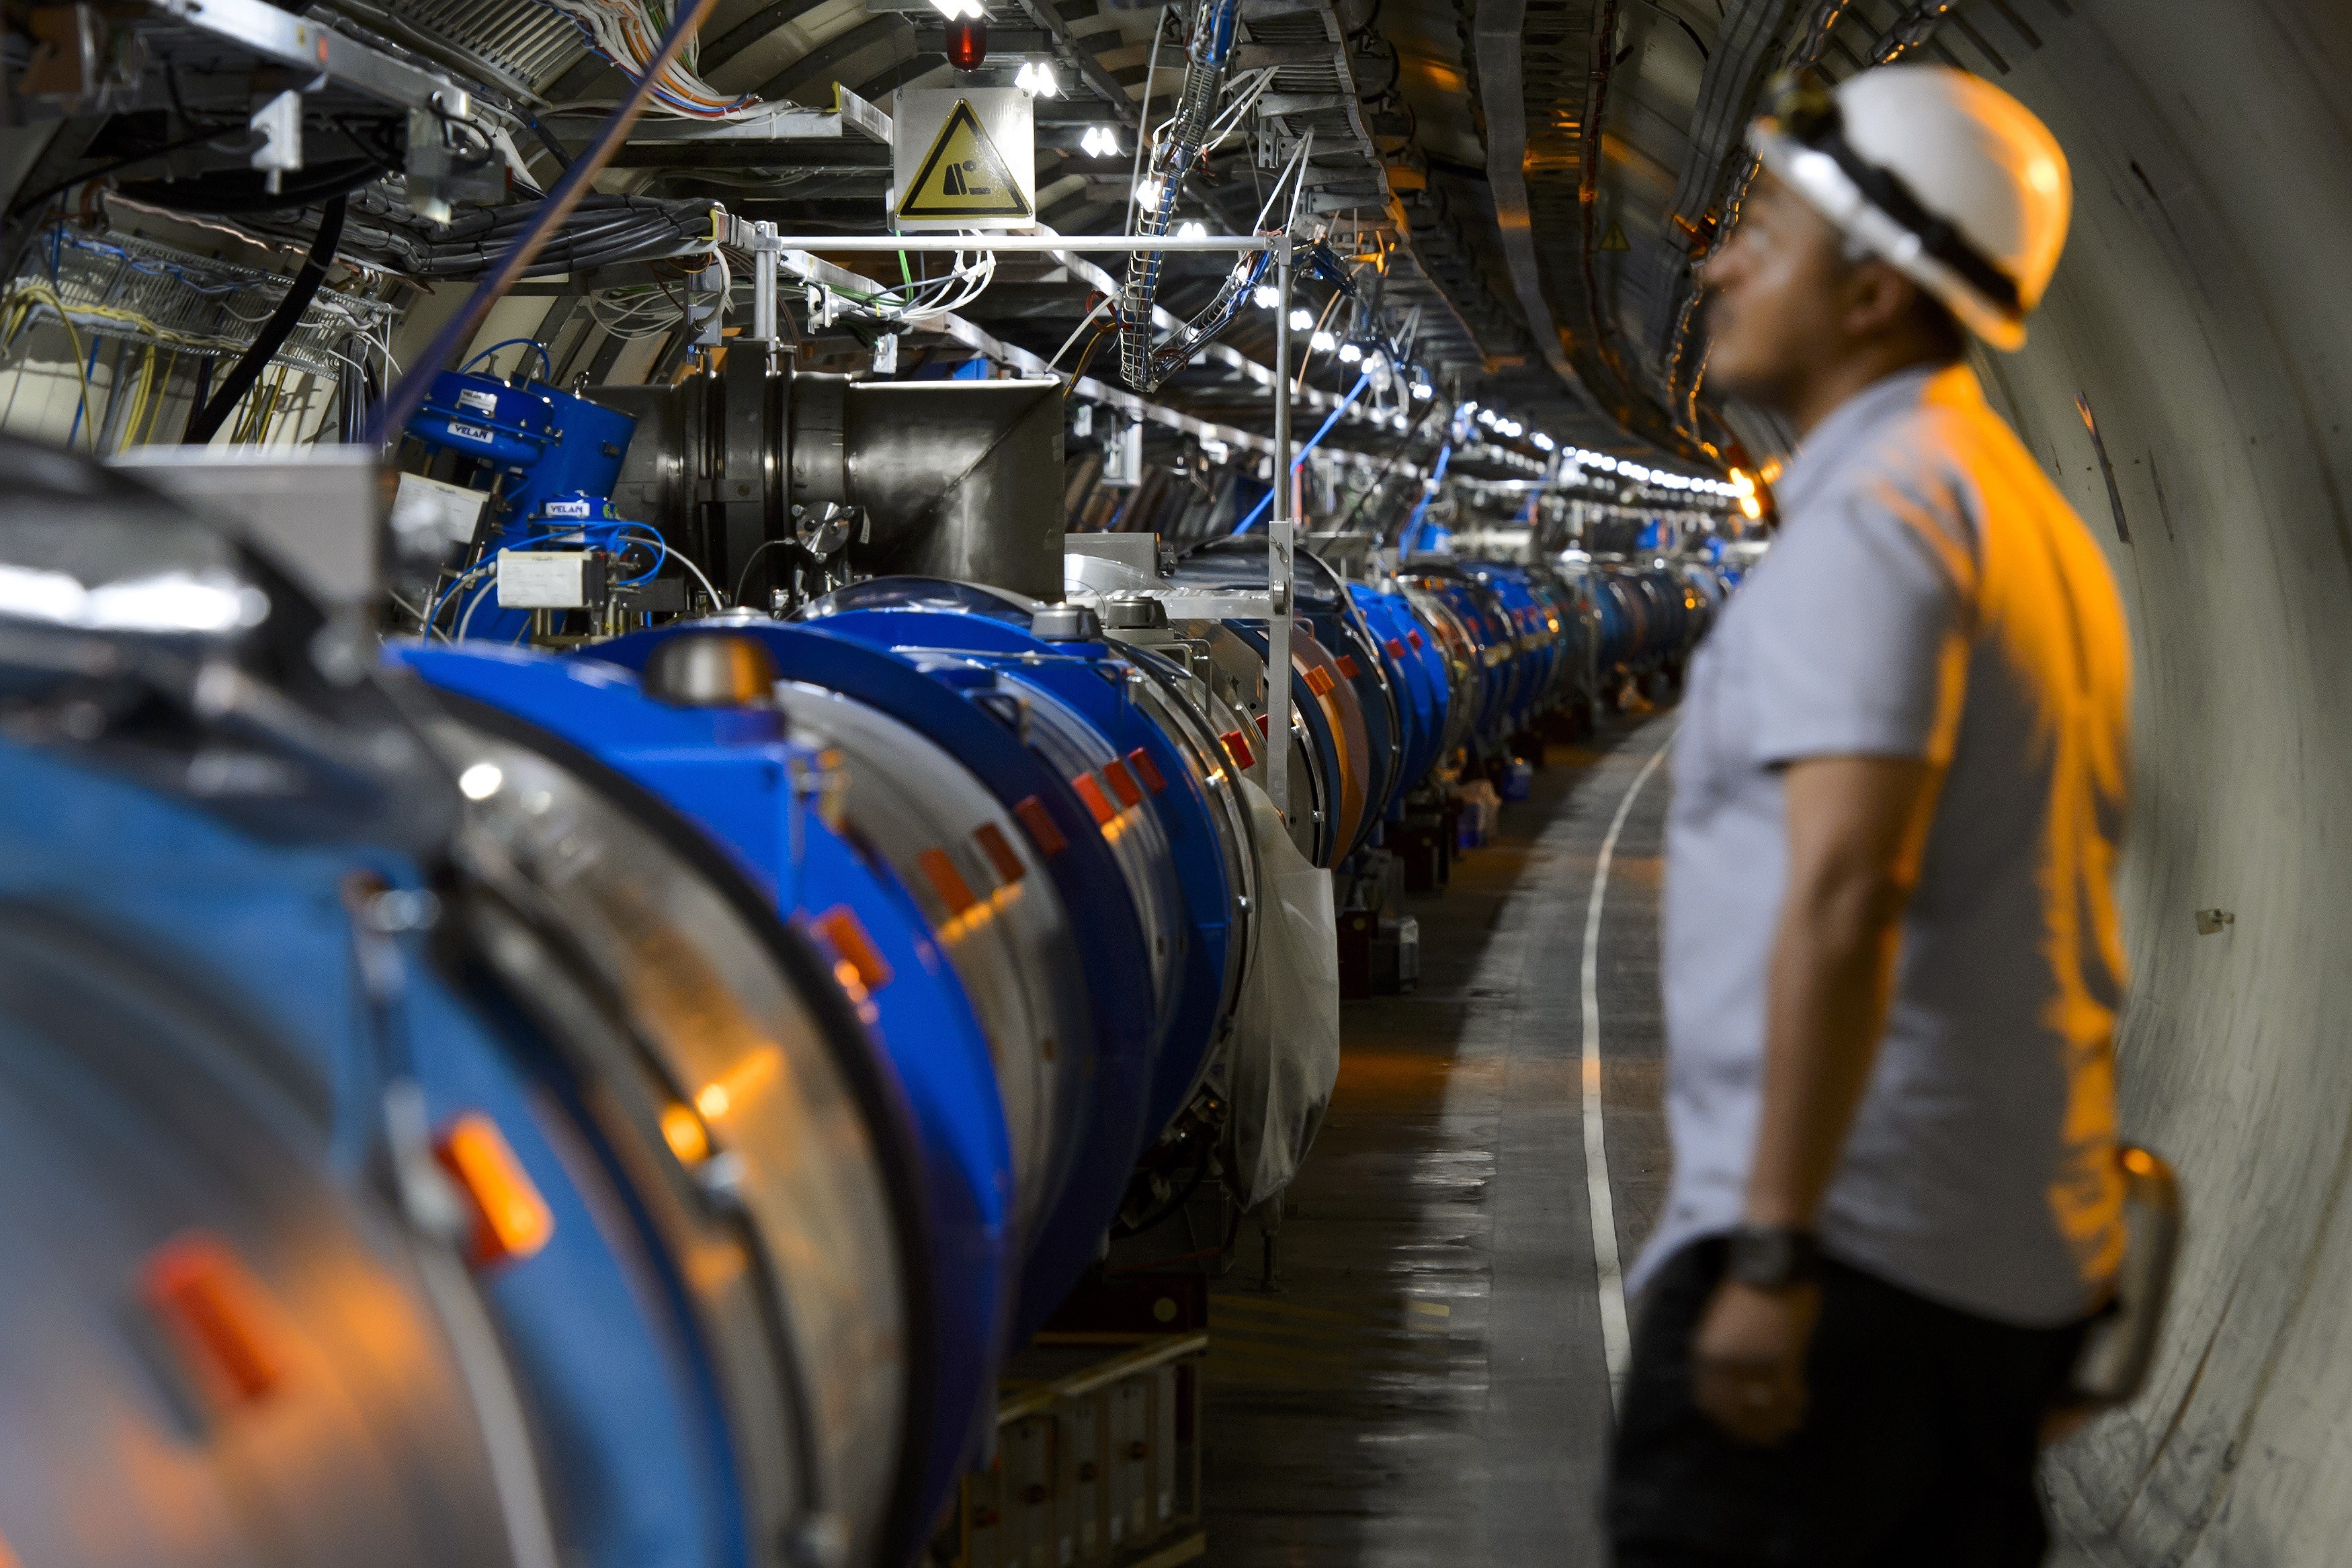 Neutrino Signals Detected at Large Hadron Collider for First Time Ever - Newsweek